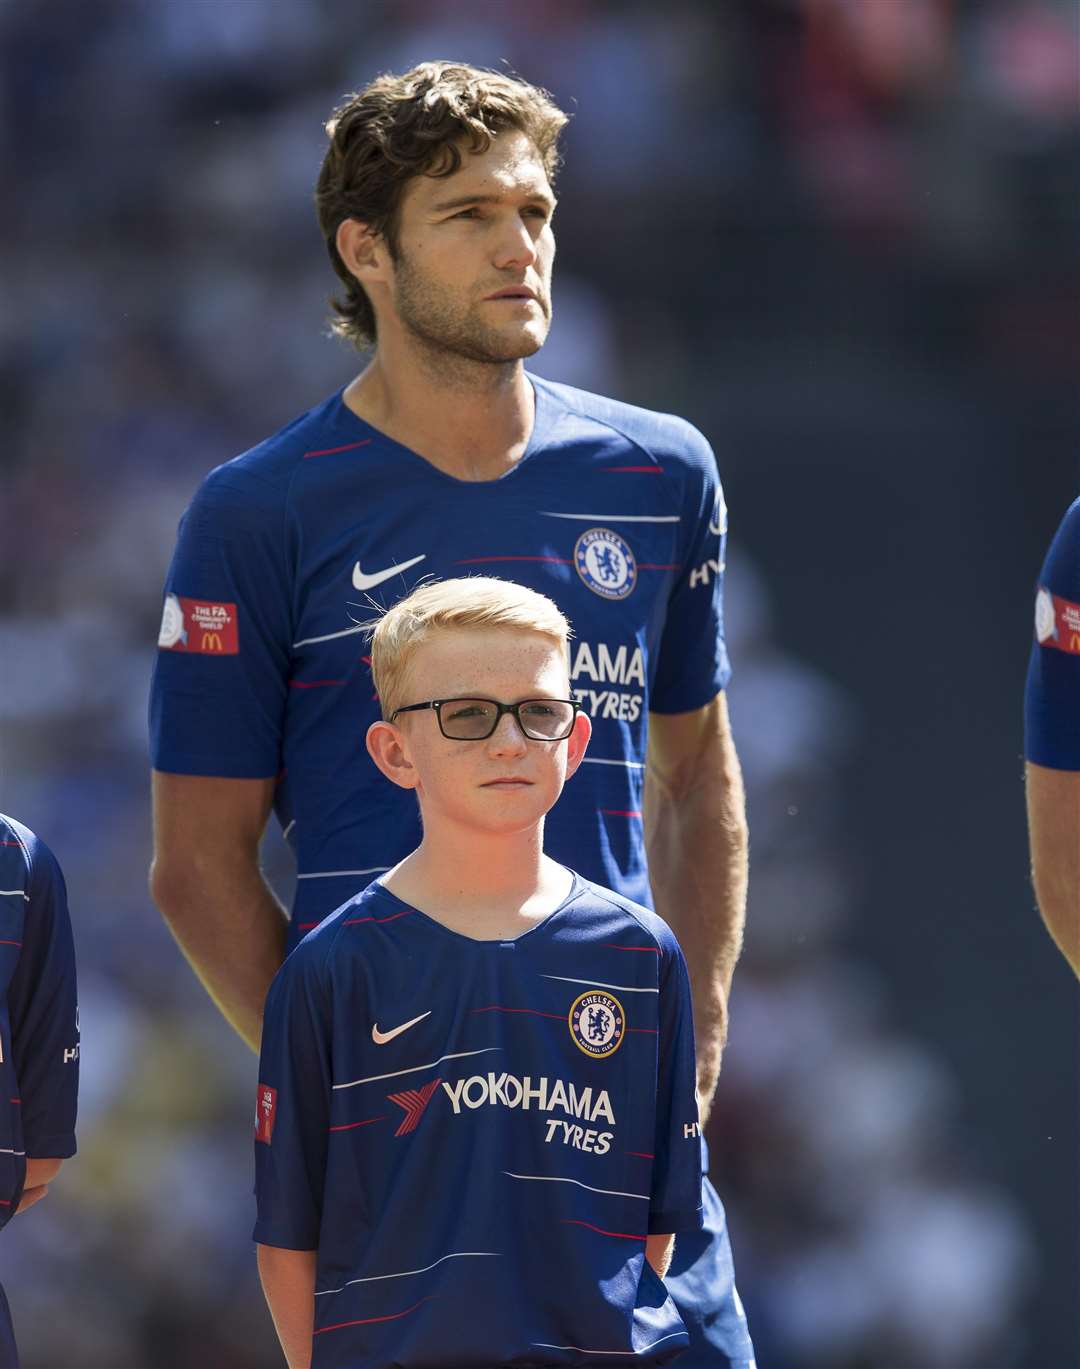 Harrison Bayford from Dartford walked out on Wembley Stadium as a player escort for Marcos Alonso, picture, Ben Queenborough for The FA